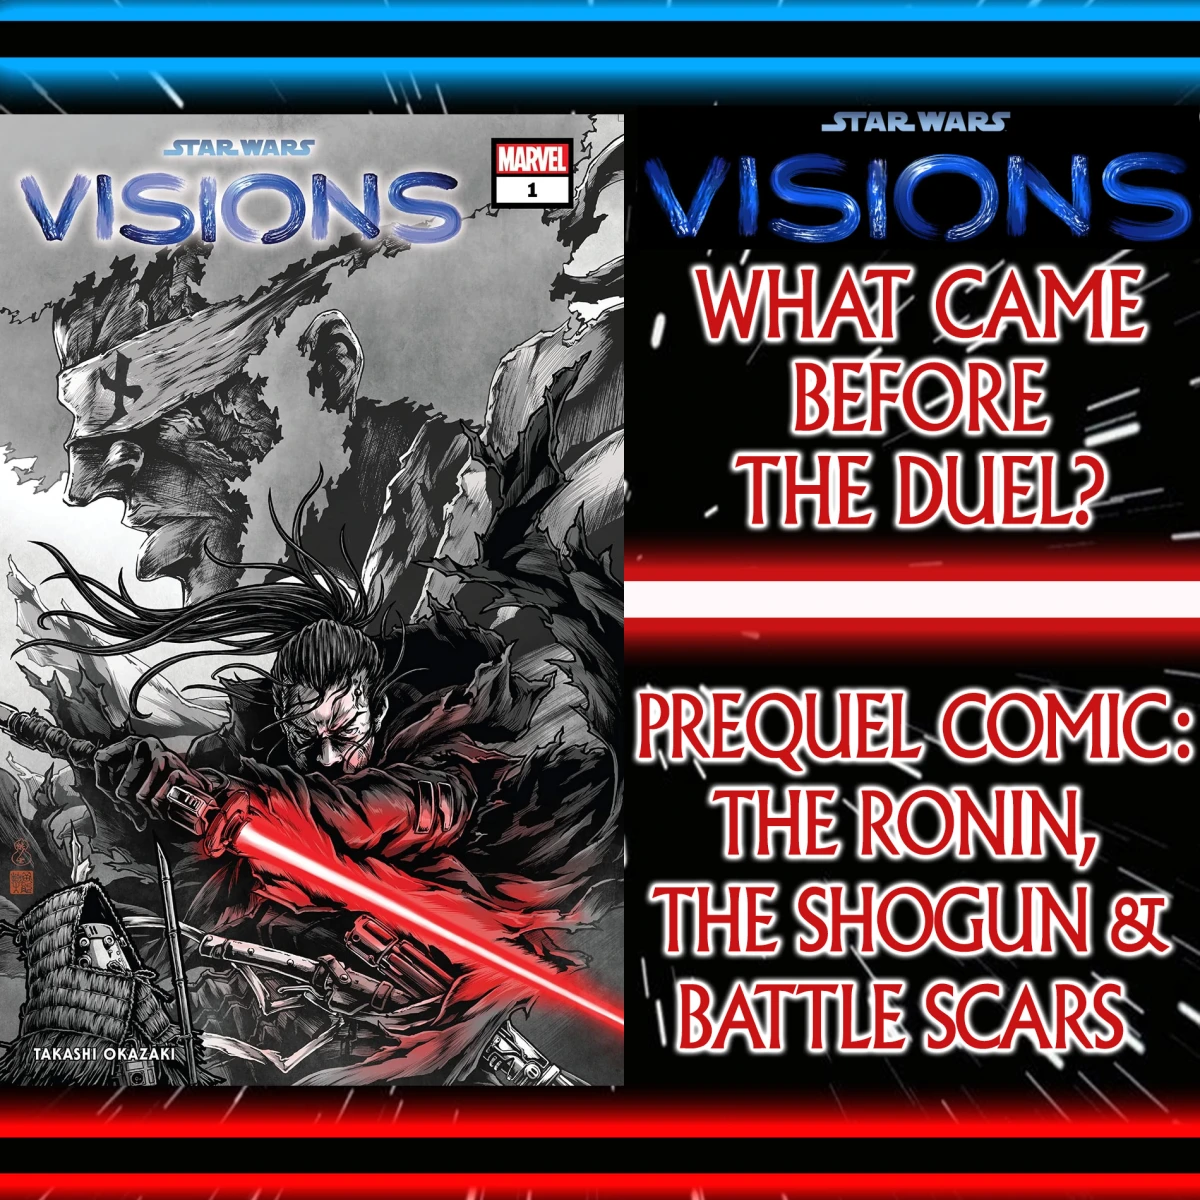 Star Wars Visions Special: What Came Before The Duel? Prequel Comic: The Ronin, The Shogun & Battle Scars – Ep 124